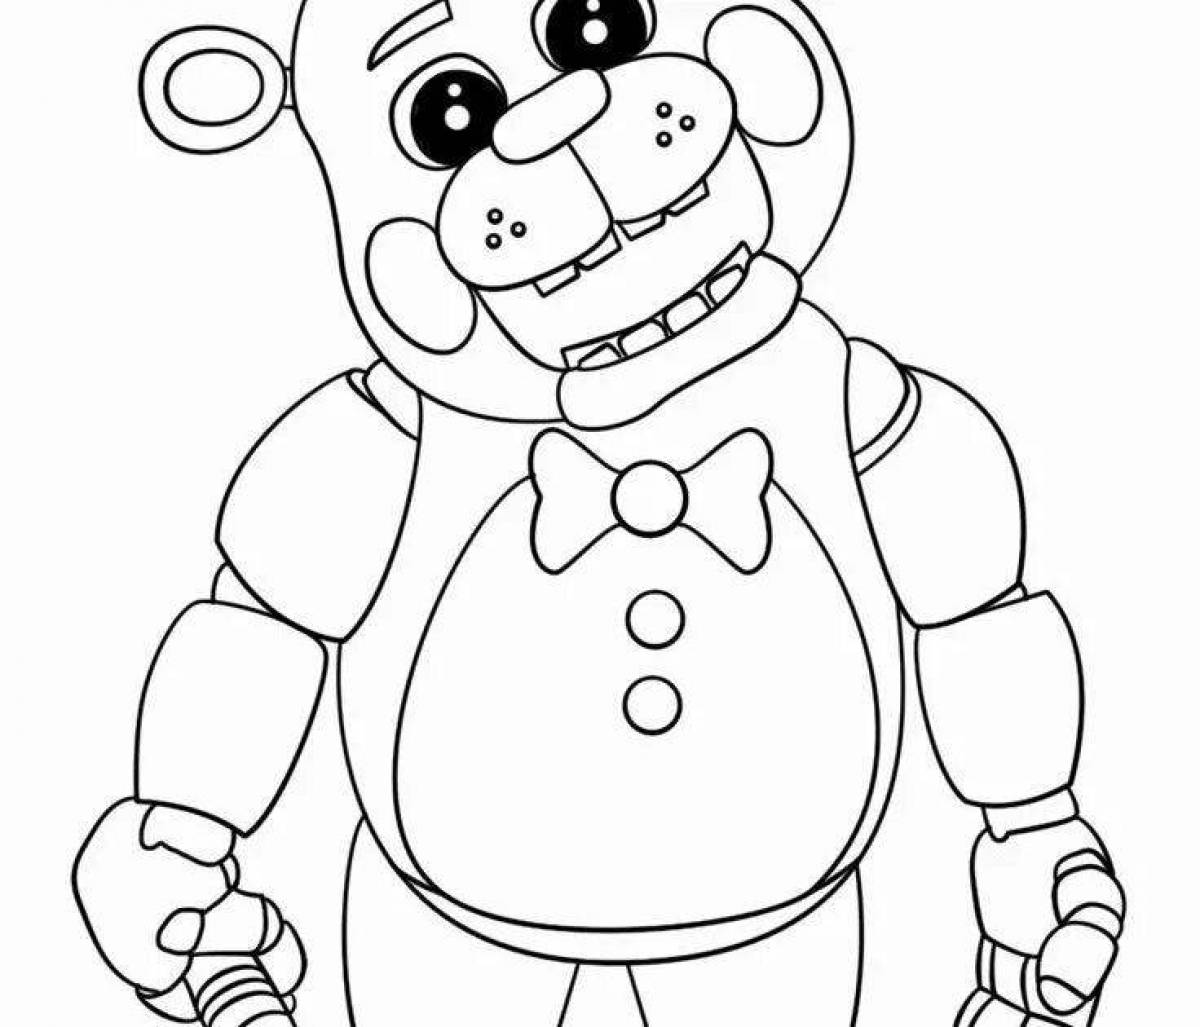 Coloring live freddy